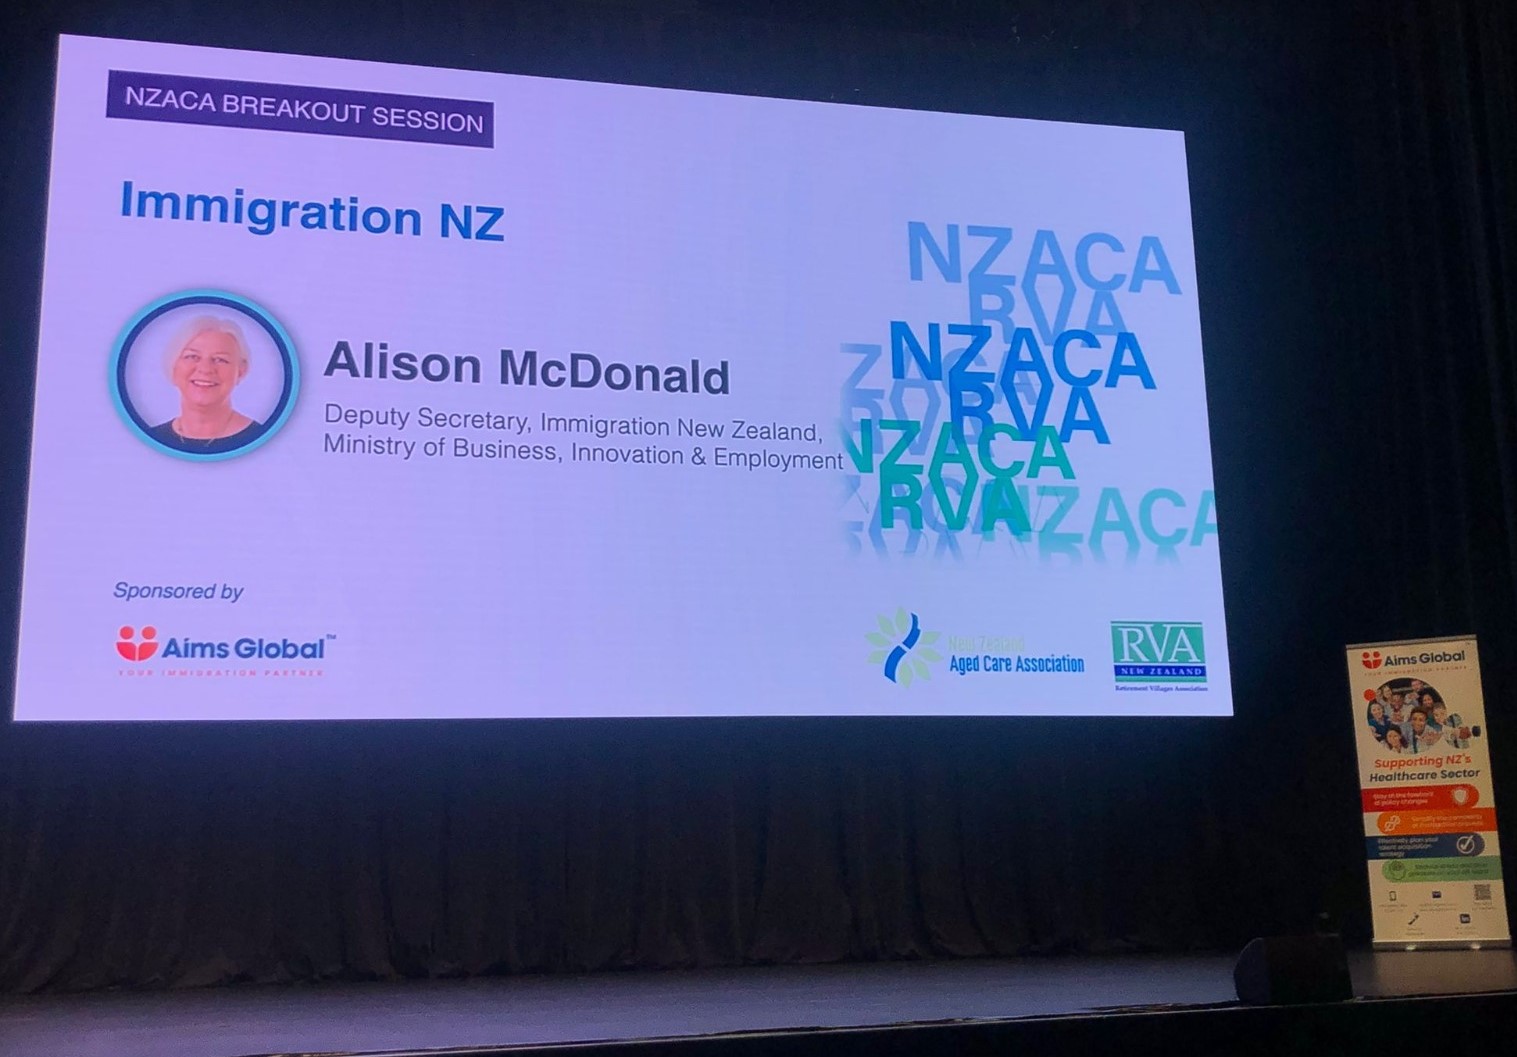 Aims Global at the NZACA & RVA Conference in August 2022